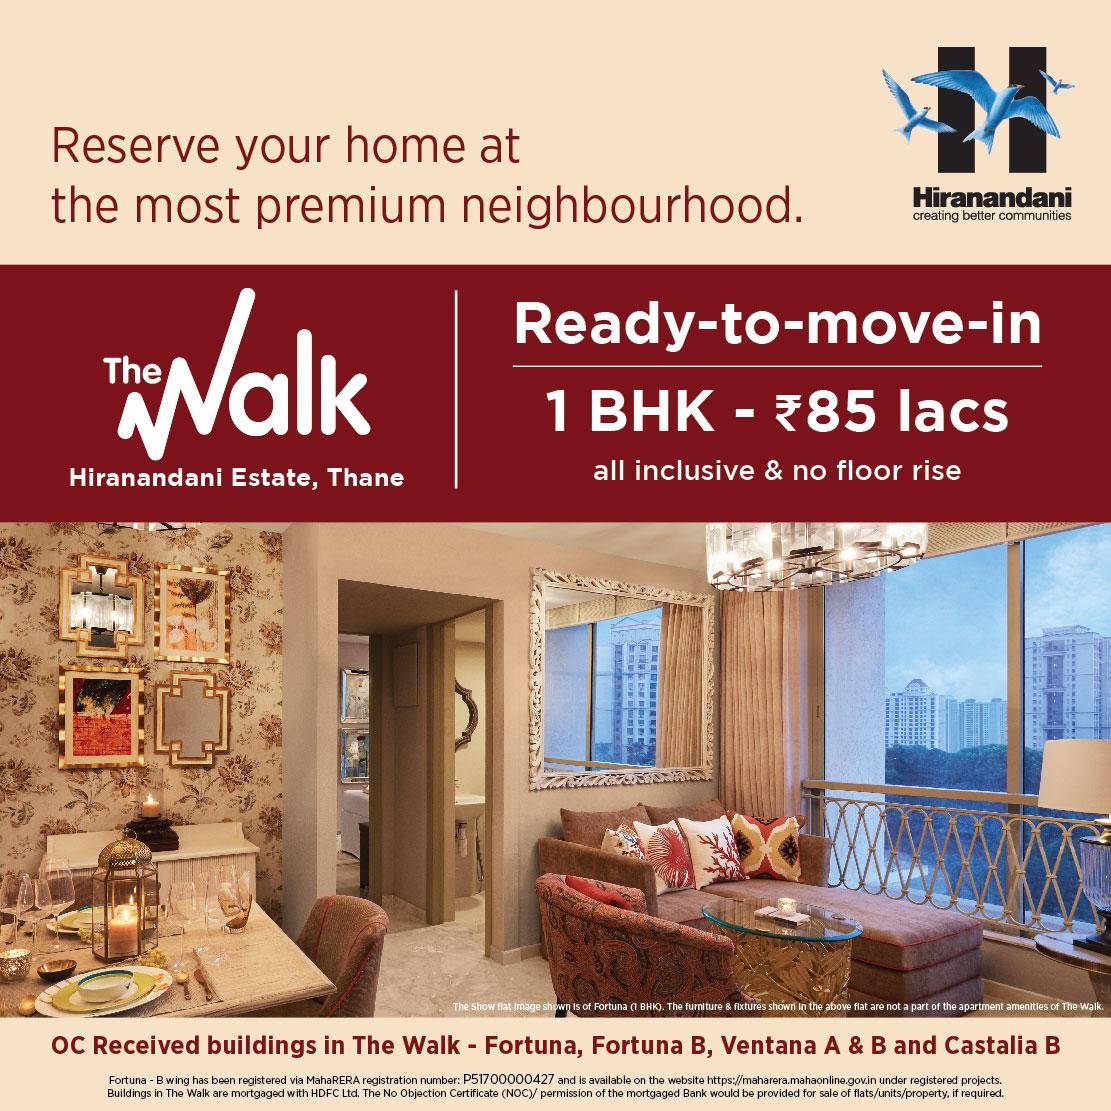 Ready to move in 1 BHK Rs 85 lakh at Hiranandani The Walk in Mumbai